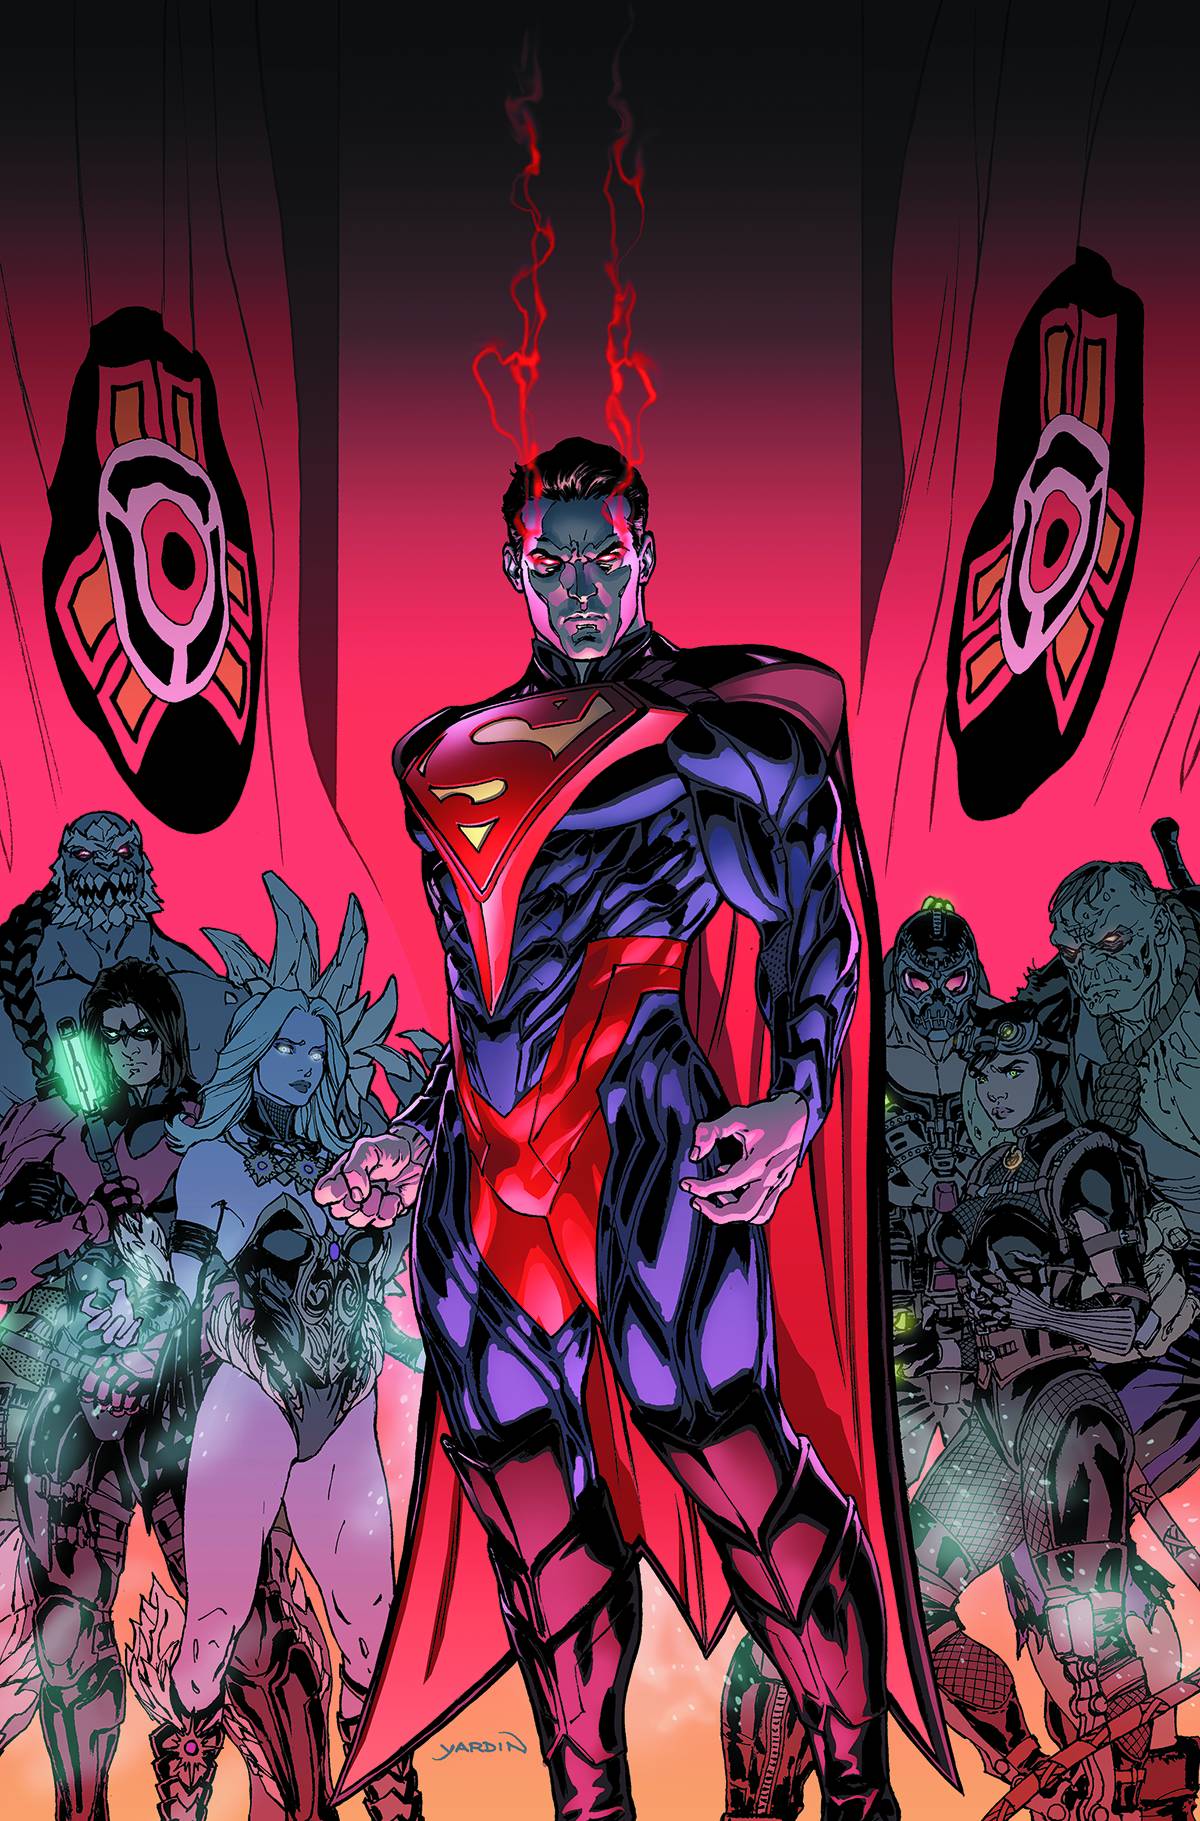 Injustice Gods Among Us Year Five #1